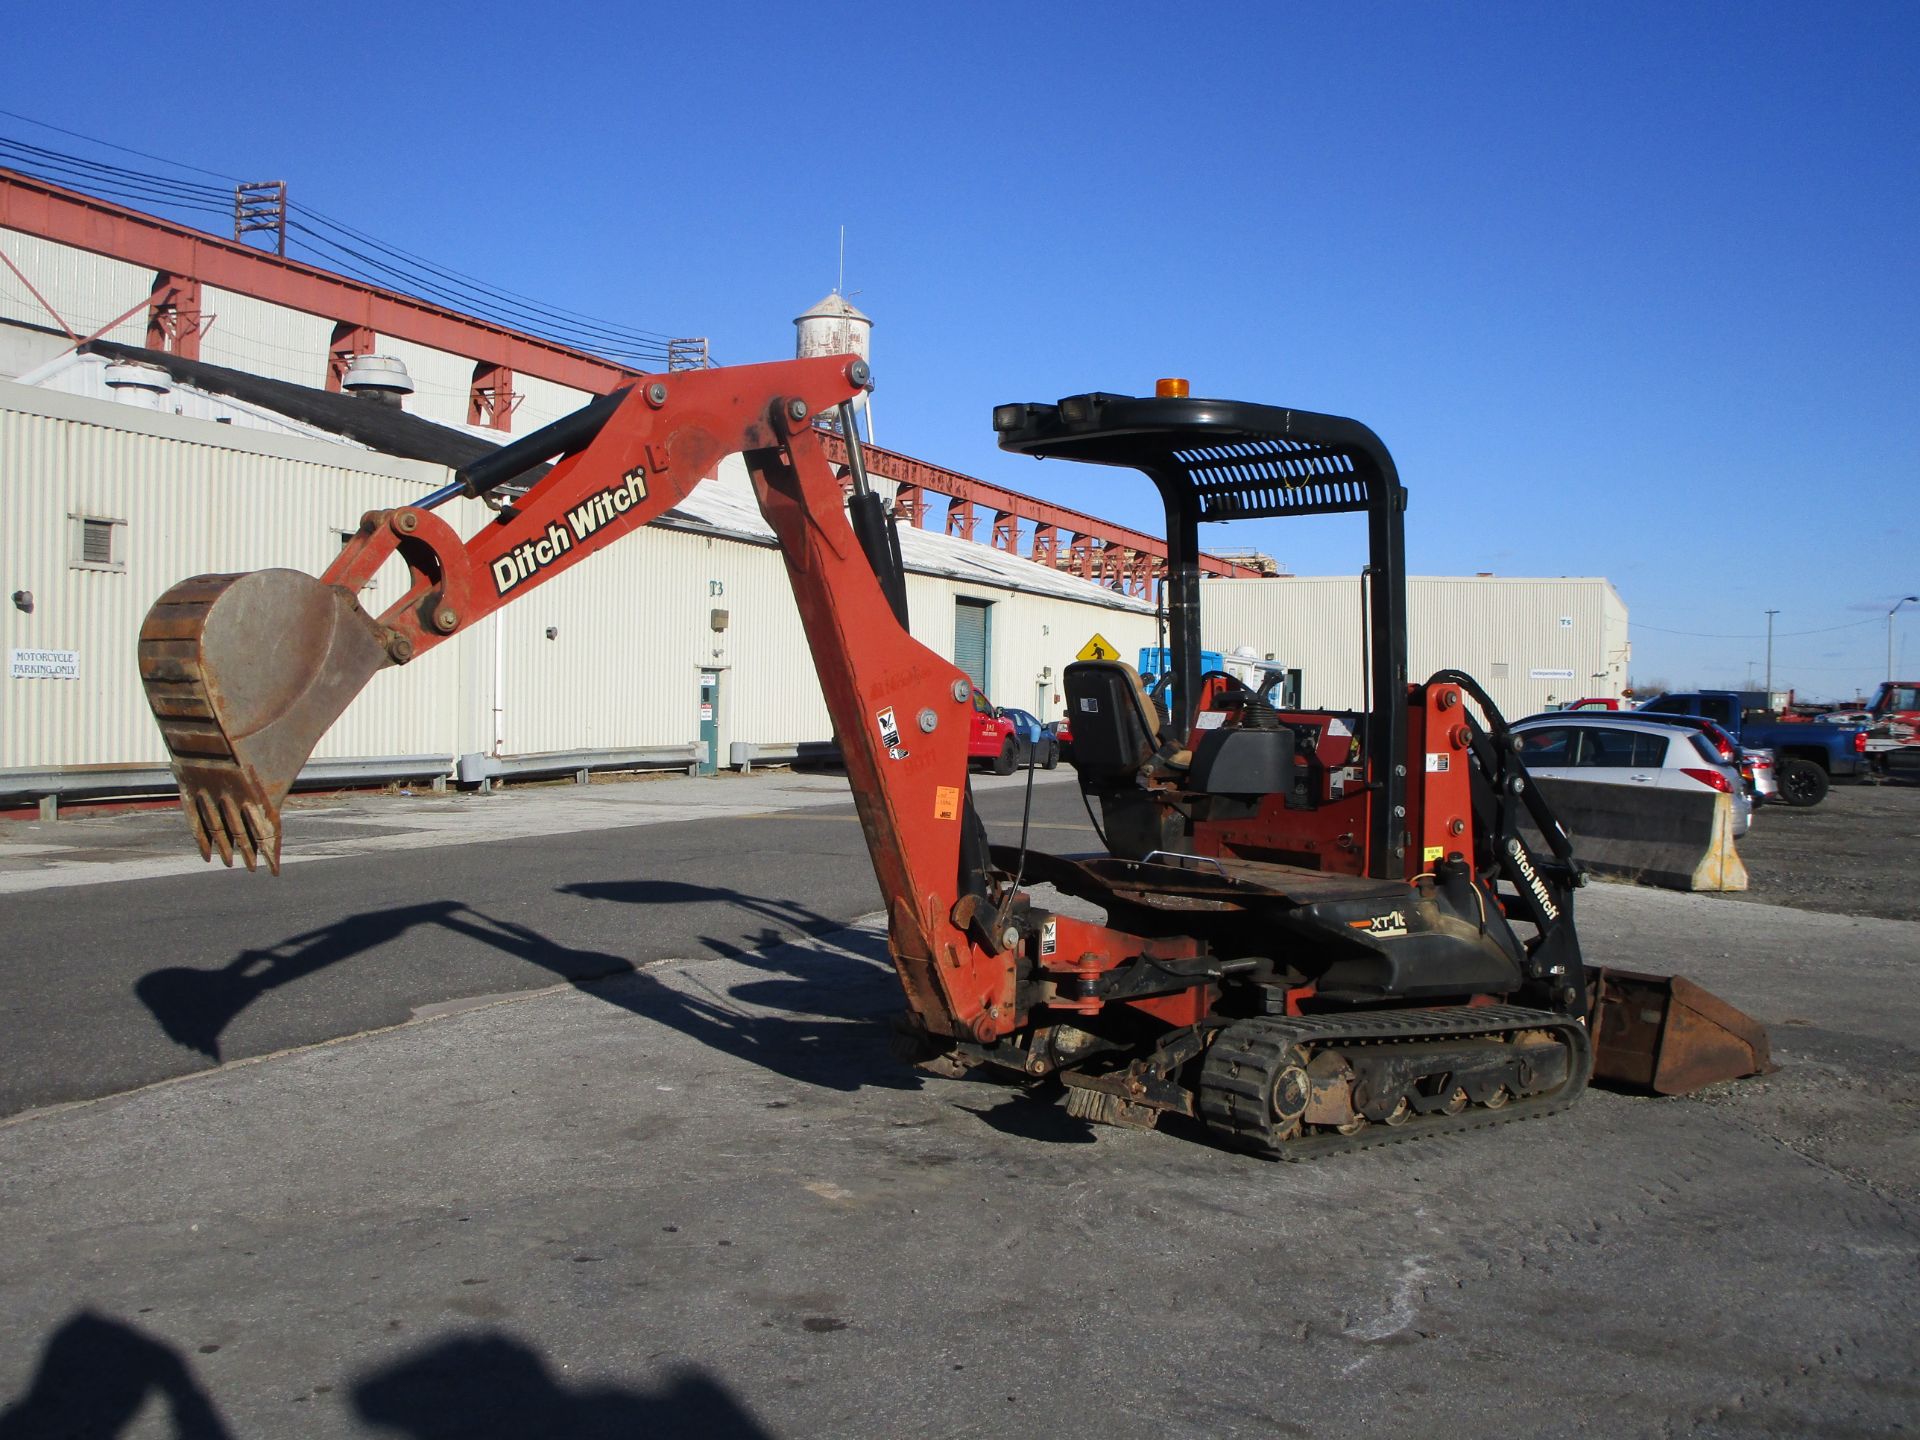 2012 Ditch Witch XT1600 Backhoe - Image 7 of 23